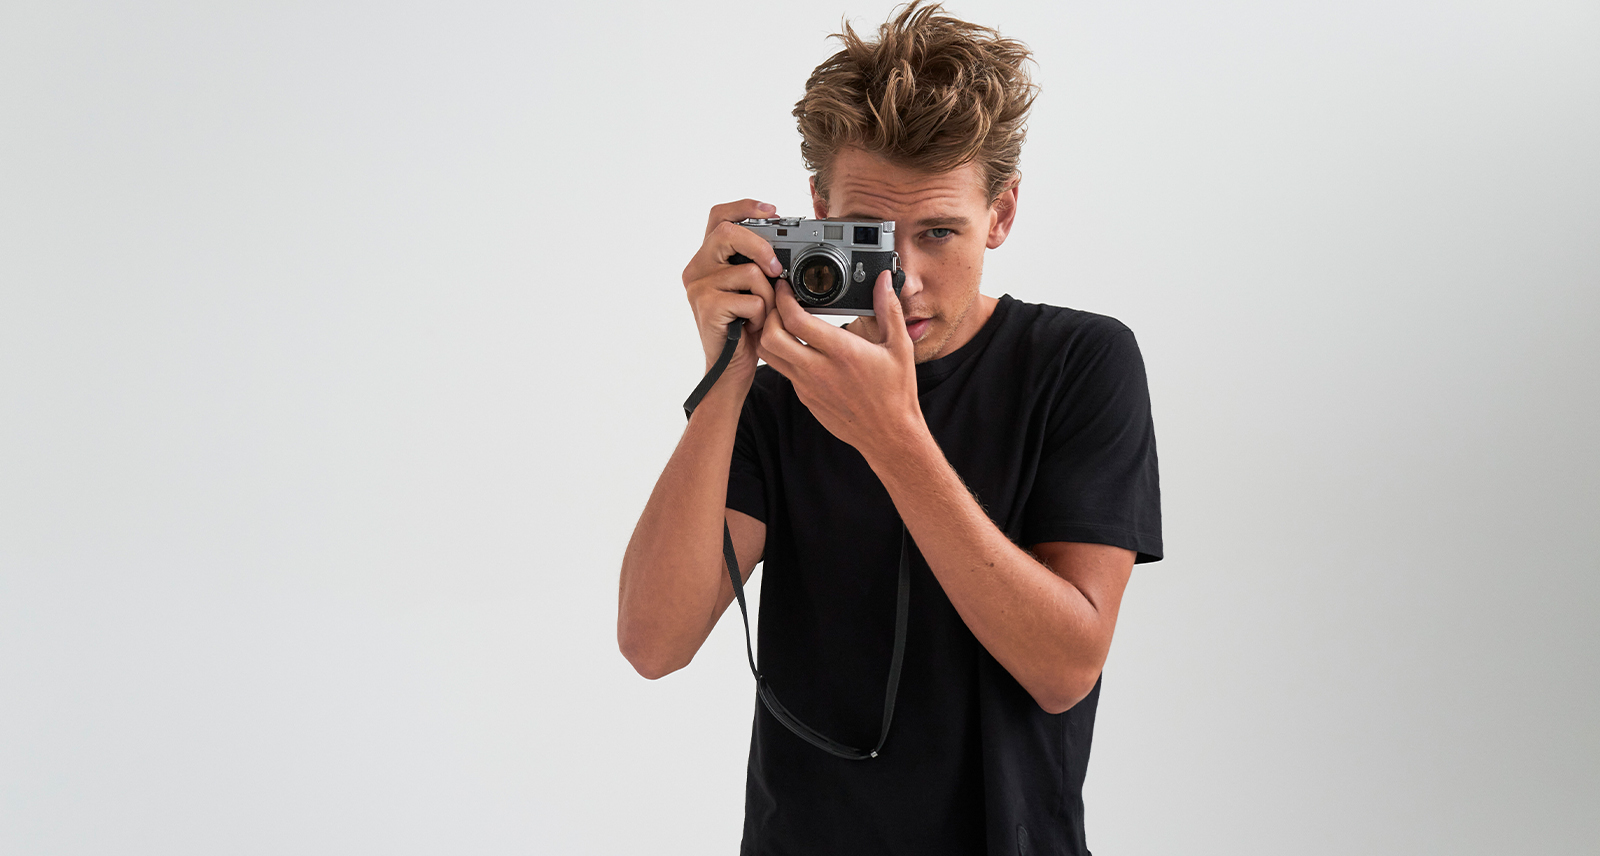 Austin Butler standing and posing with camera